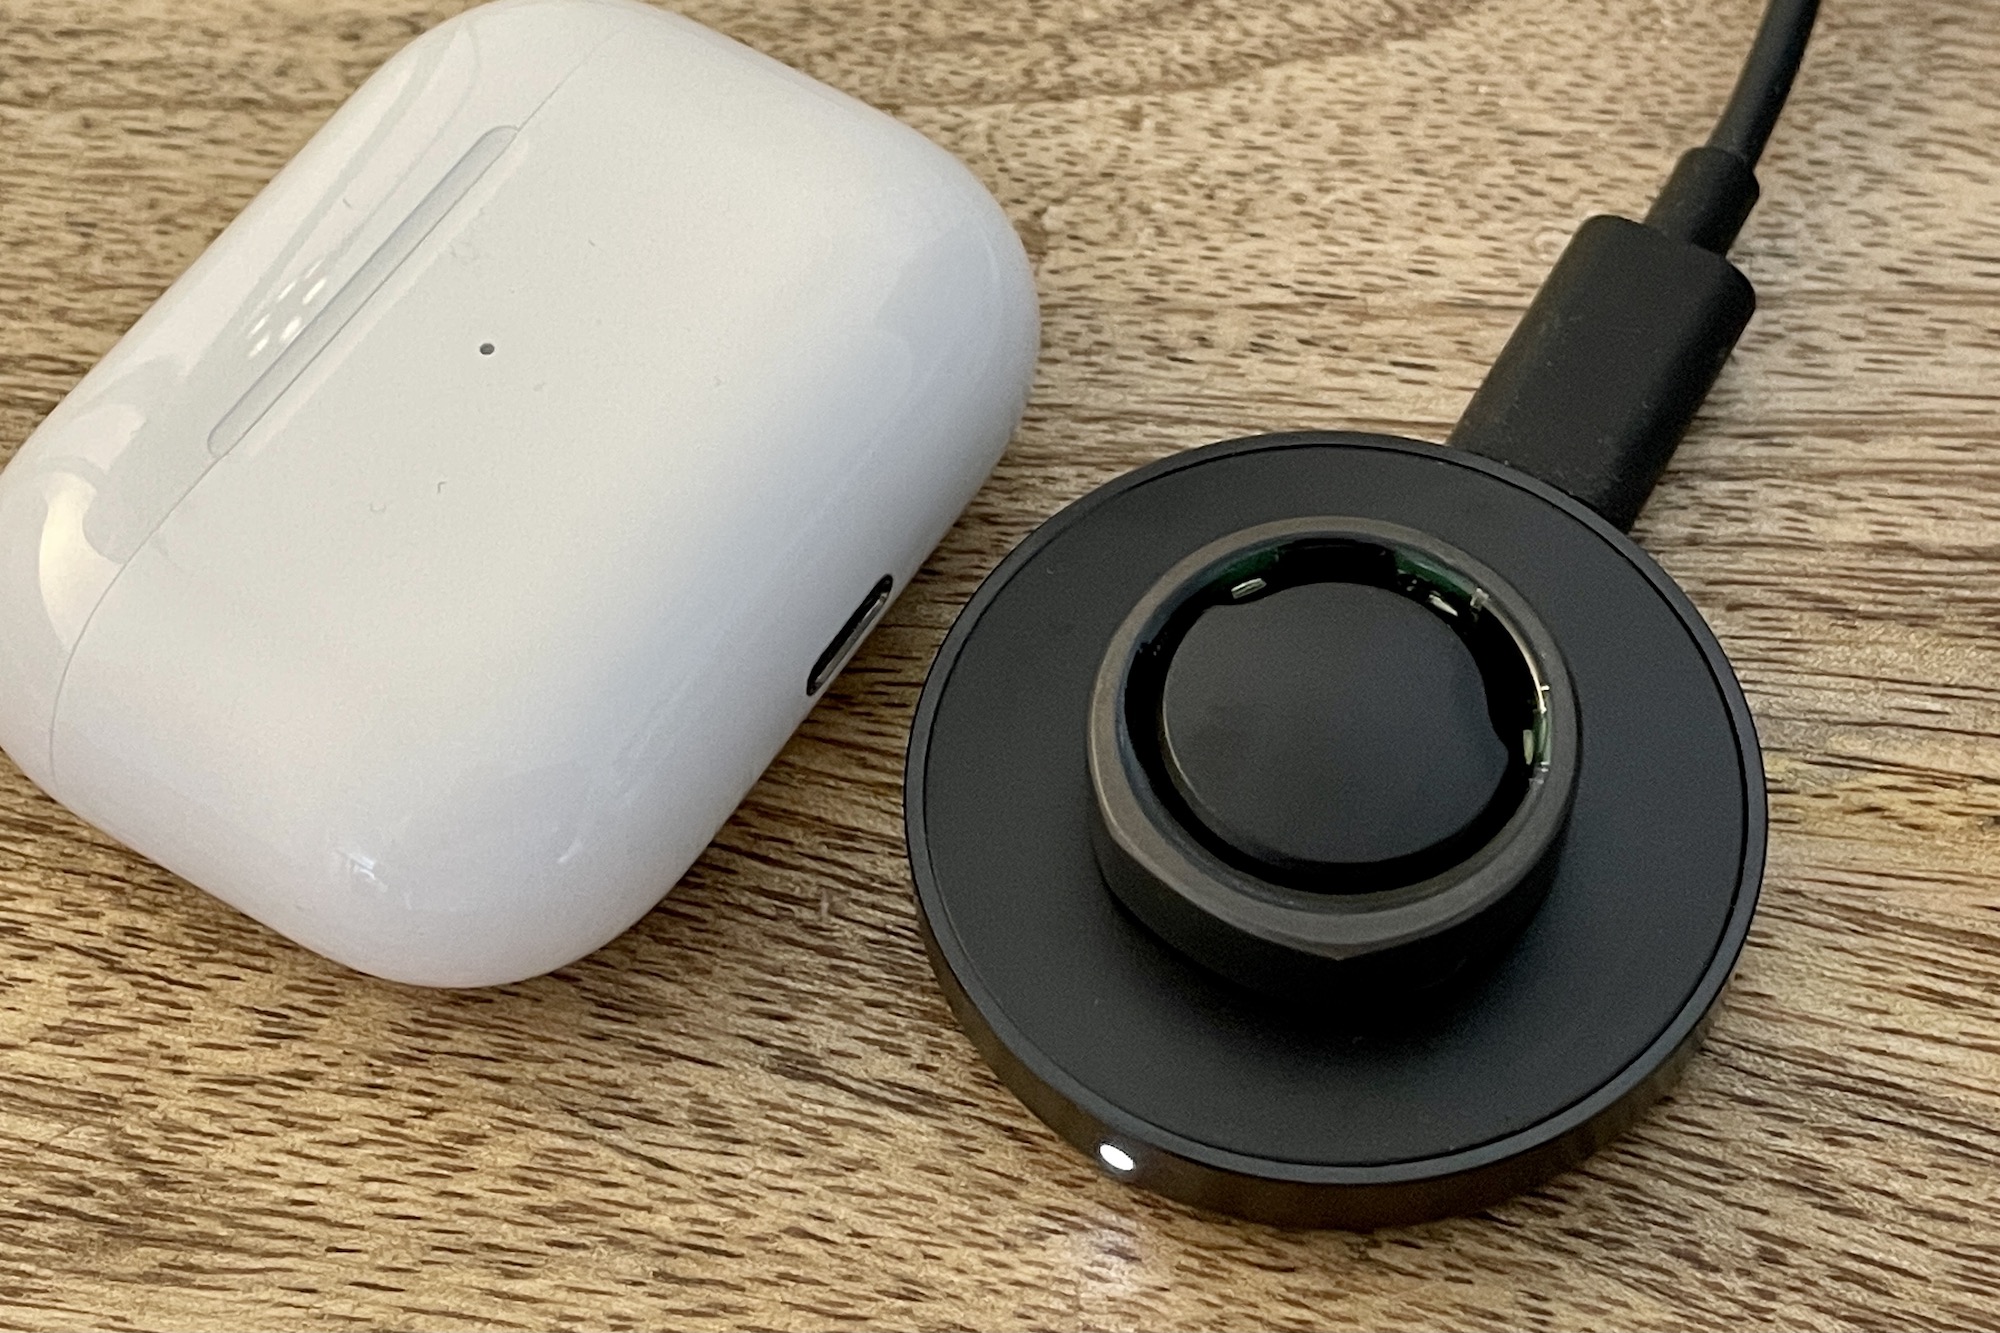 Review: Oura Ring 3 and Whoop 4.0 are 2 ambitious wearables, but